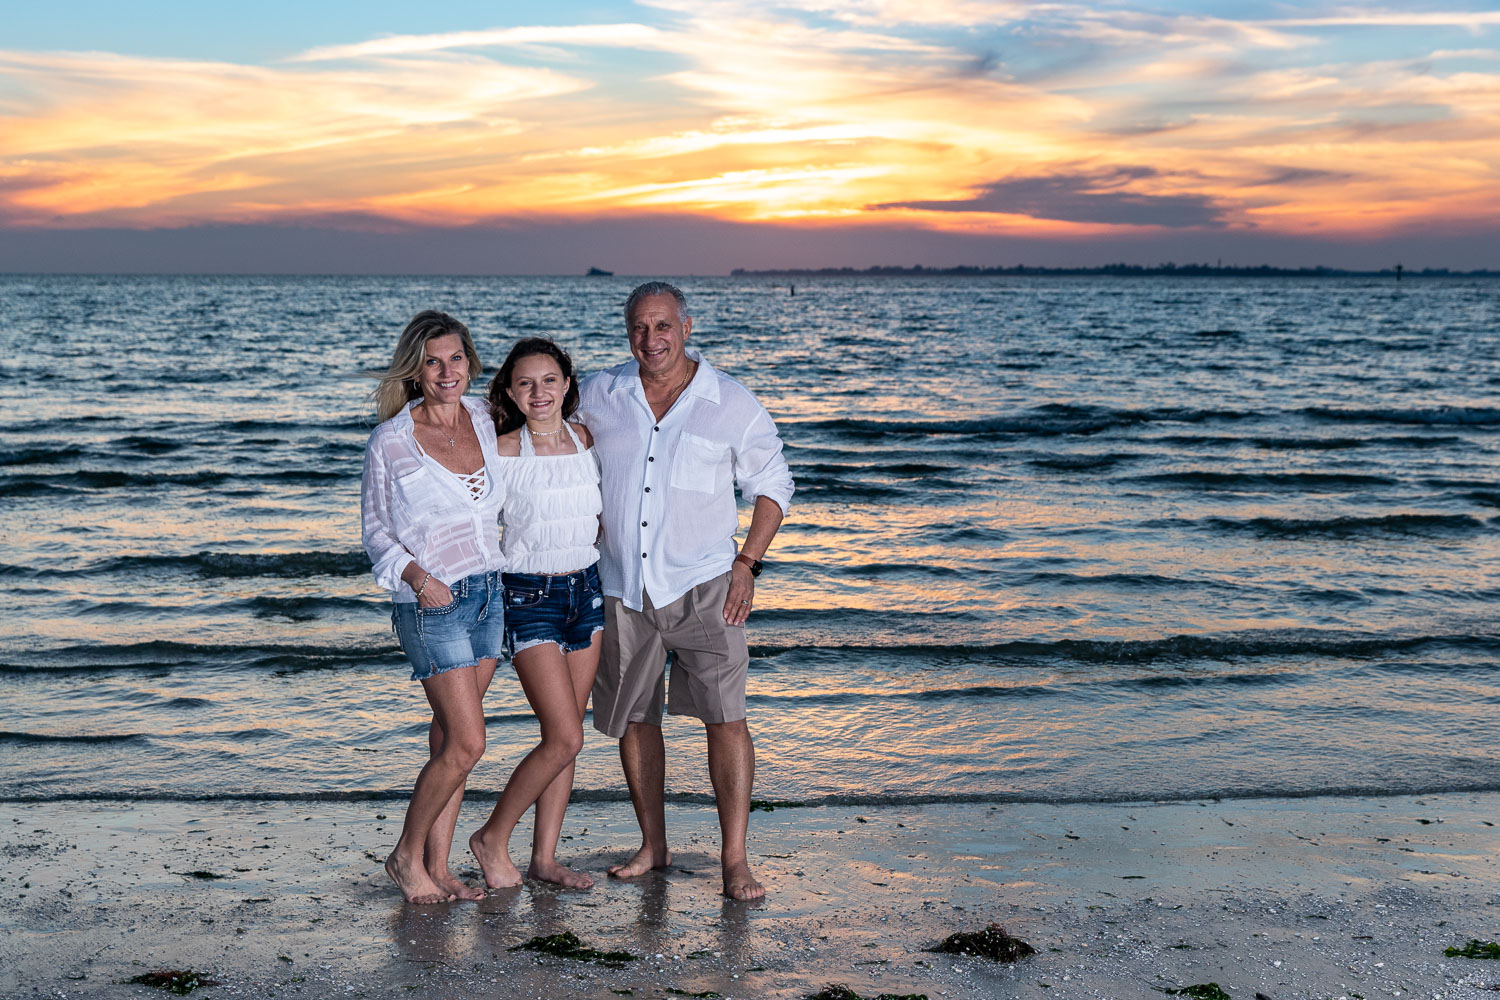   Steve McCarthy Photography: Premier SWFL Wedding, Portrait and Event Photographer serving all of SWFL , from Tampa to Naples, Fort Myers Beach, Pine Island, Sanibel, Captiva and Marco Island and over to Miami and up to Delray Beach, including: Tamp